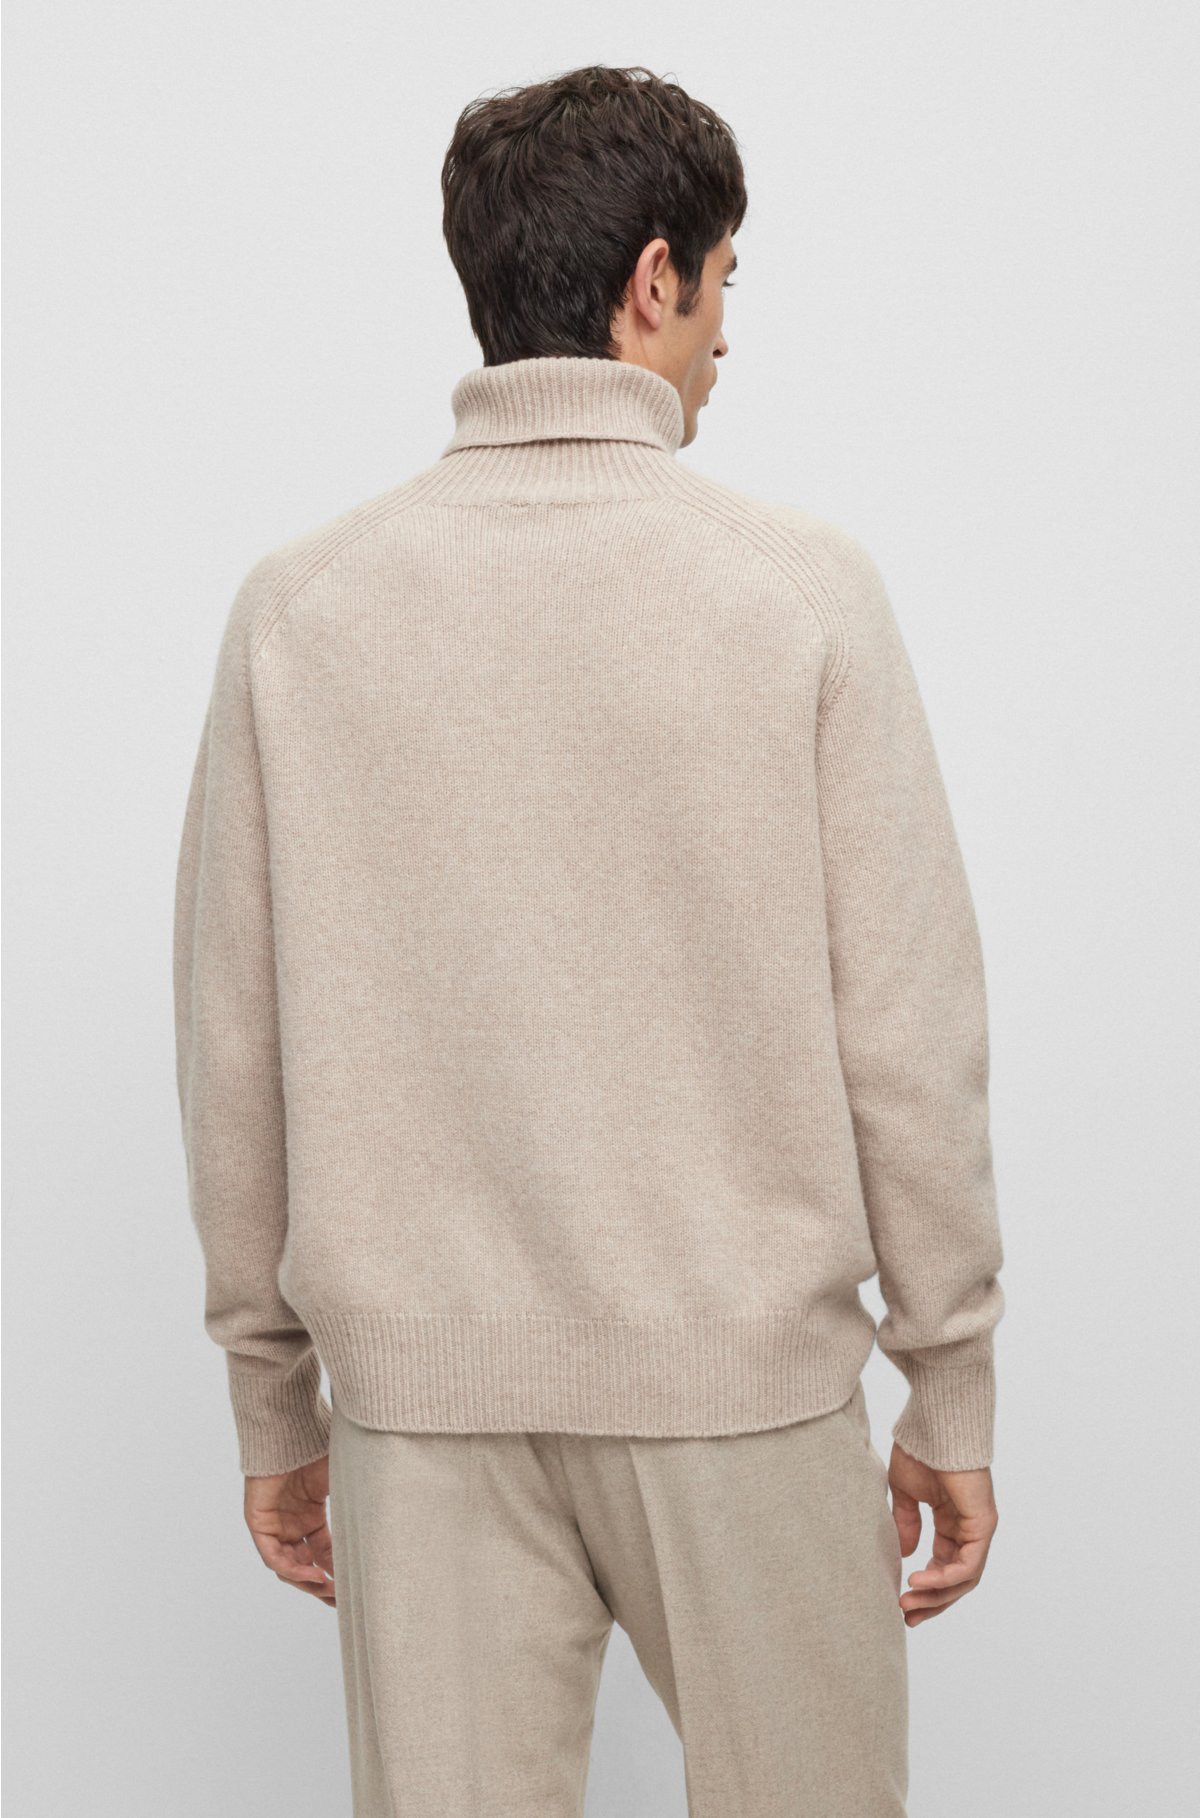 All-gender relaxed-fit sweater in virgin wool, White